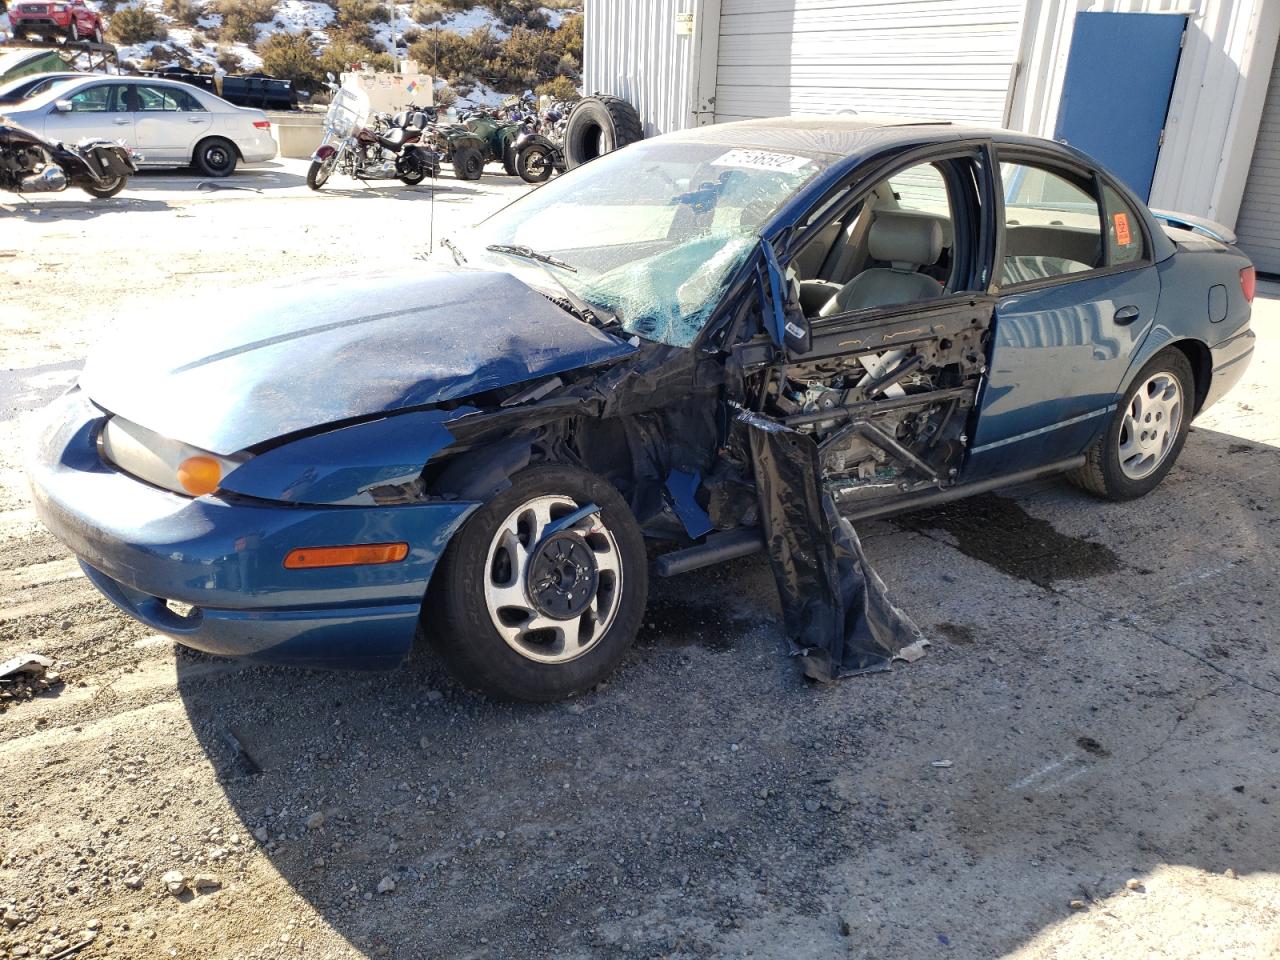 2001 Saturn SL2 for sale at Copart Reno, NV. Lot #67566*** |  SalvageAutosAuction.com